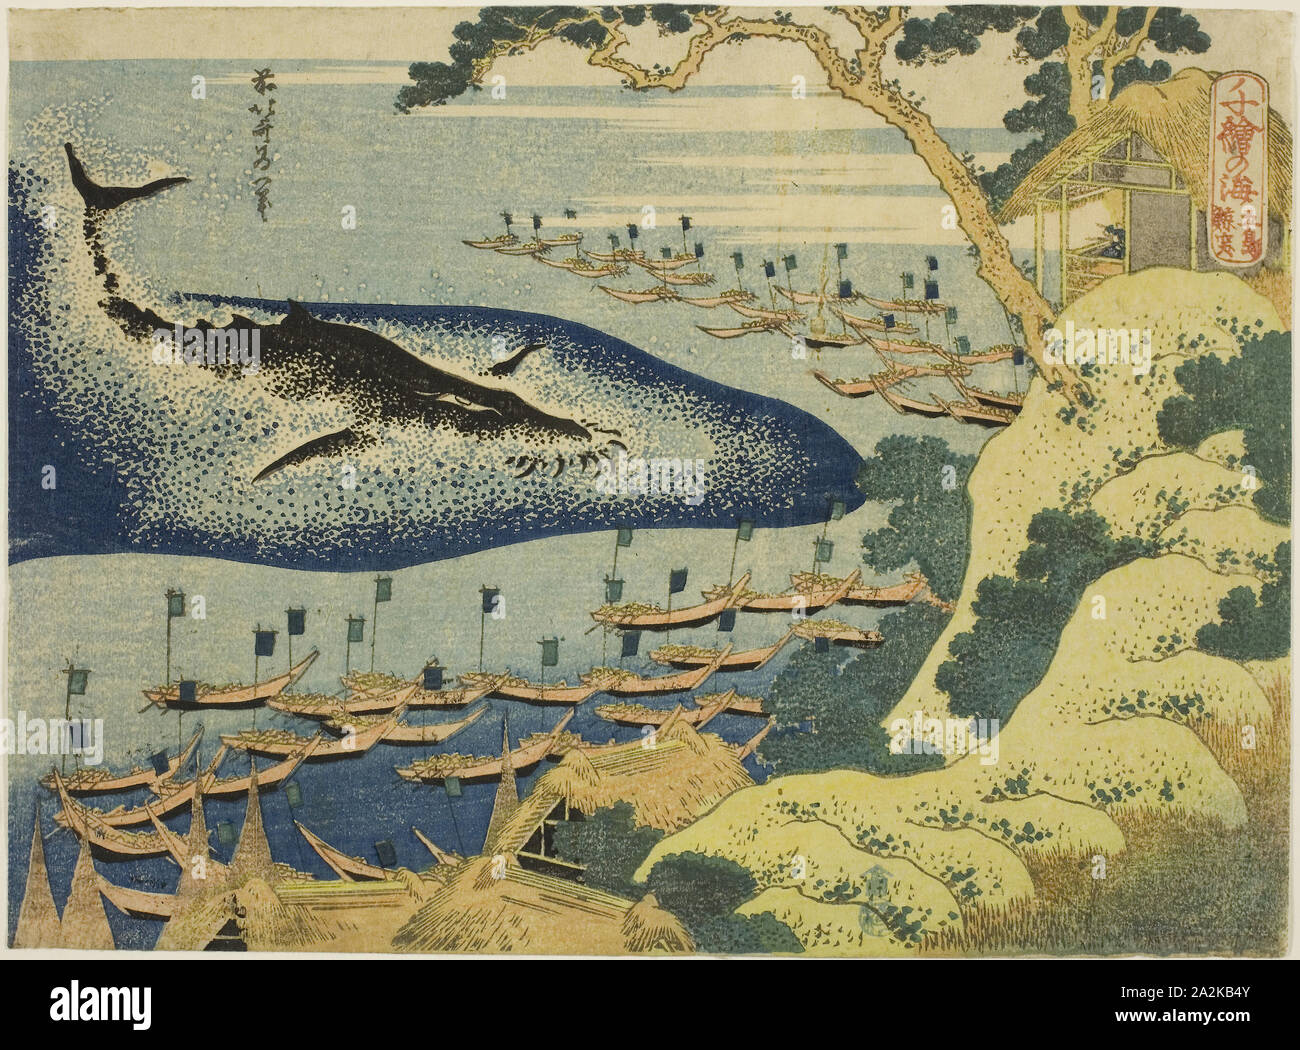 Whaling off the Coast of the Goto Islands (Goto kujira tsuki), from the series One Thousand Pictures of the Ocean (Chie no umi), c. 1831–33, Katsushika Hokusai 葛飾 北斎, Japanese, 1760-1849, Japan, Color woodblock print, chuban, 19.0 x 25.7 cm Stock Photo